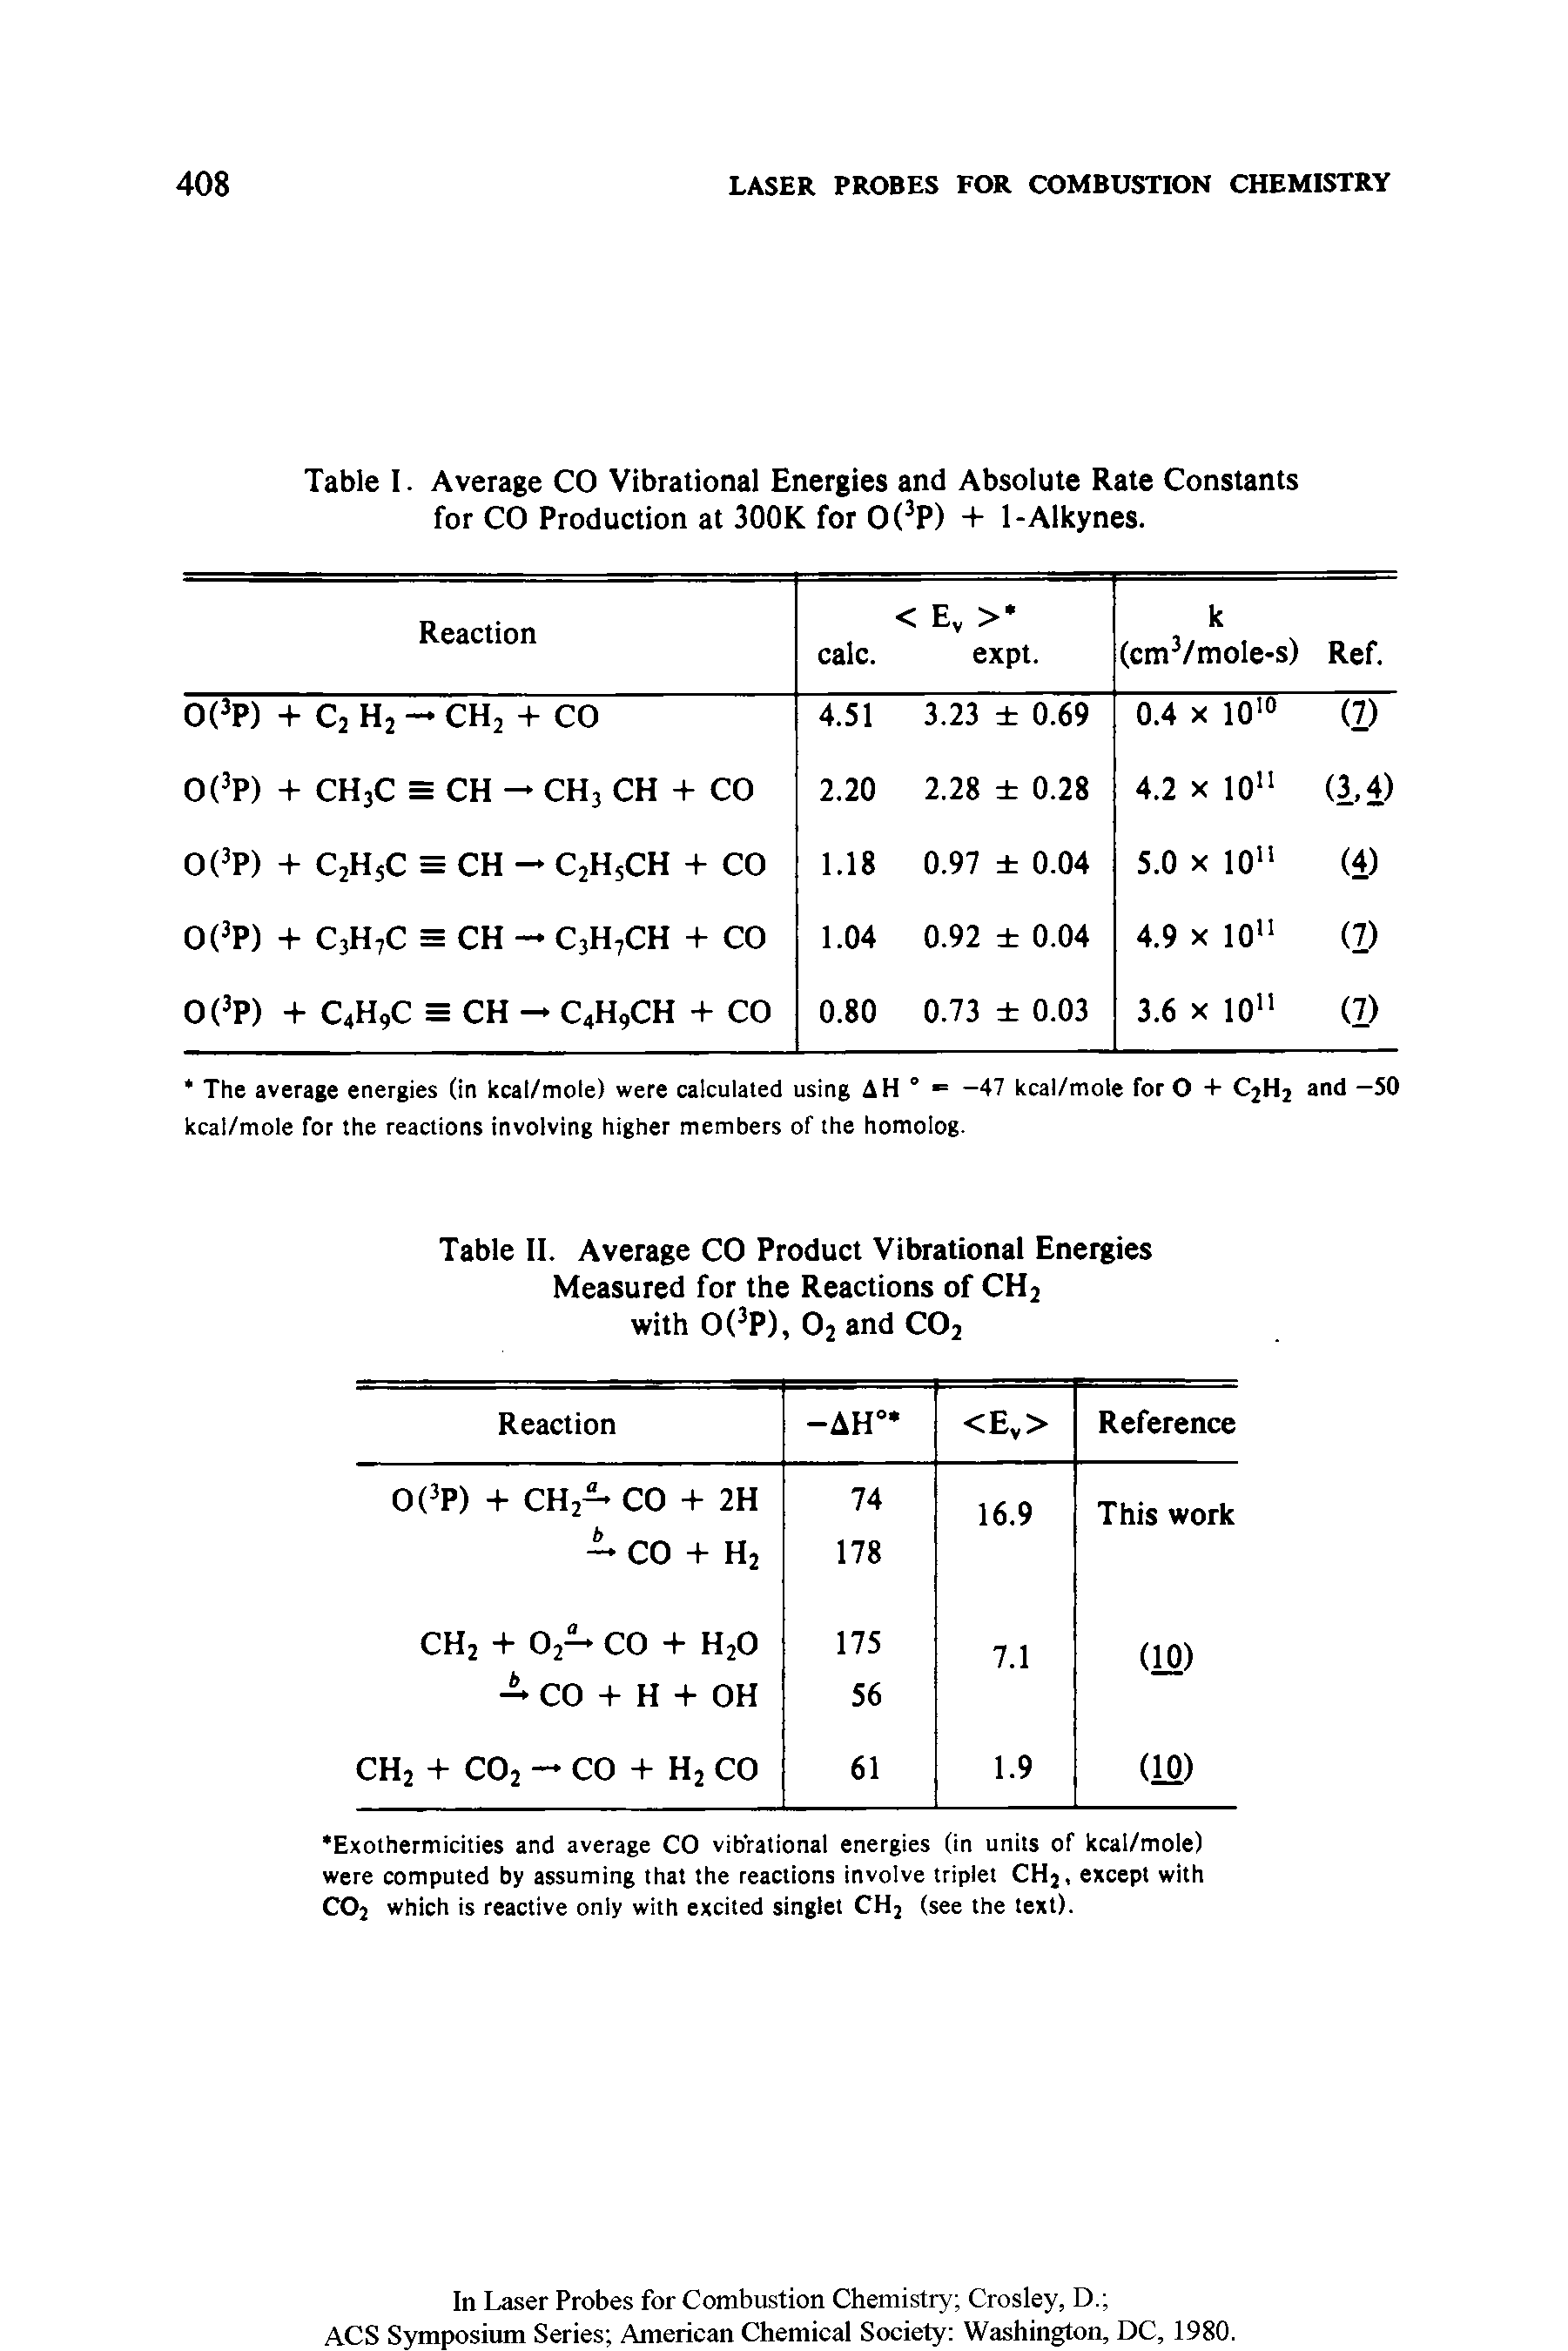 Table I. Average CO Vibrational Energies and Absolute Rate Constants for CO Production at 300K for 0(3P) + 1-Alkynes.